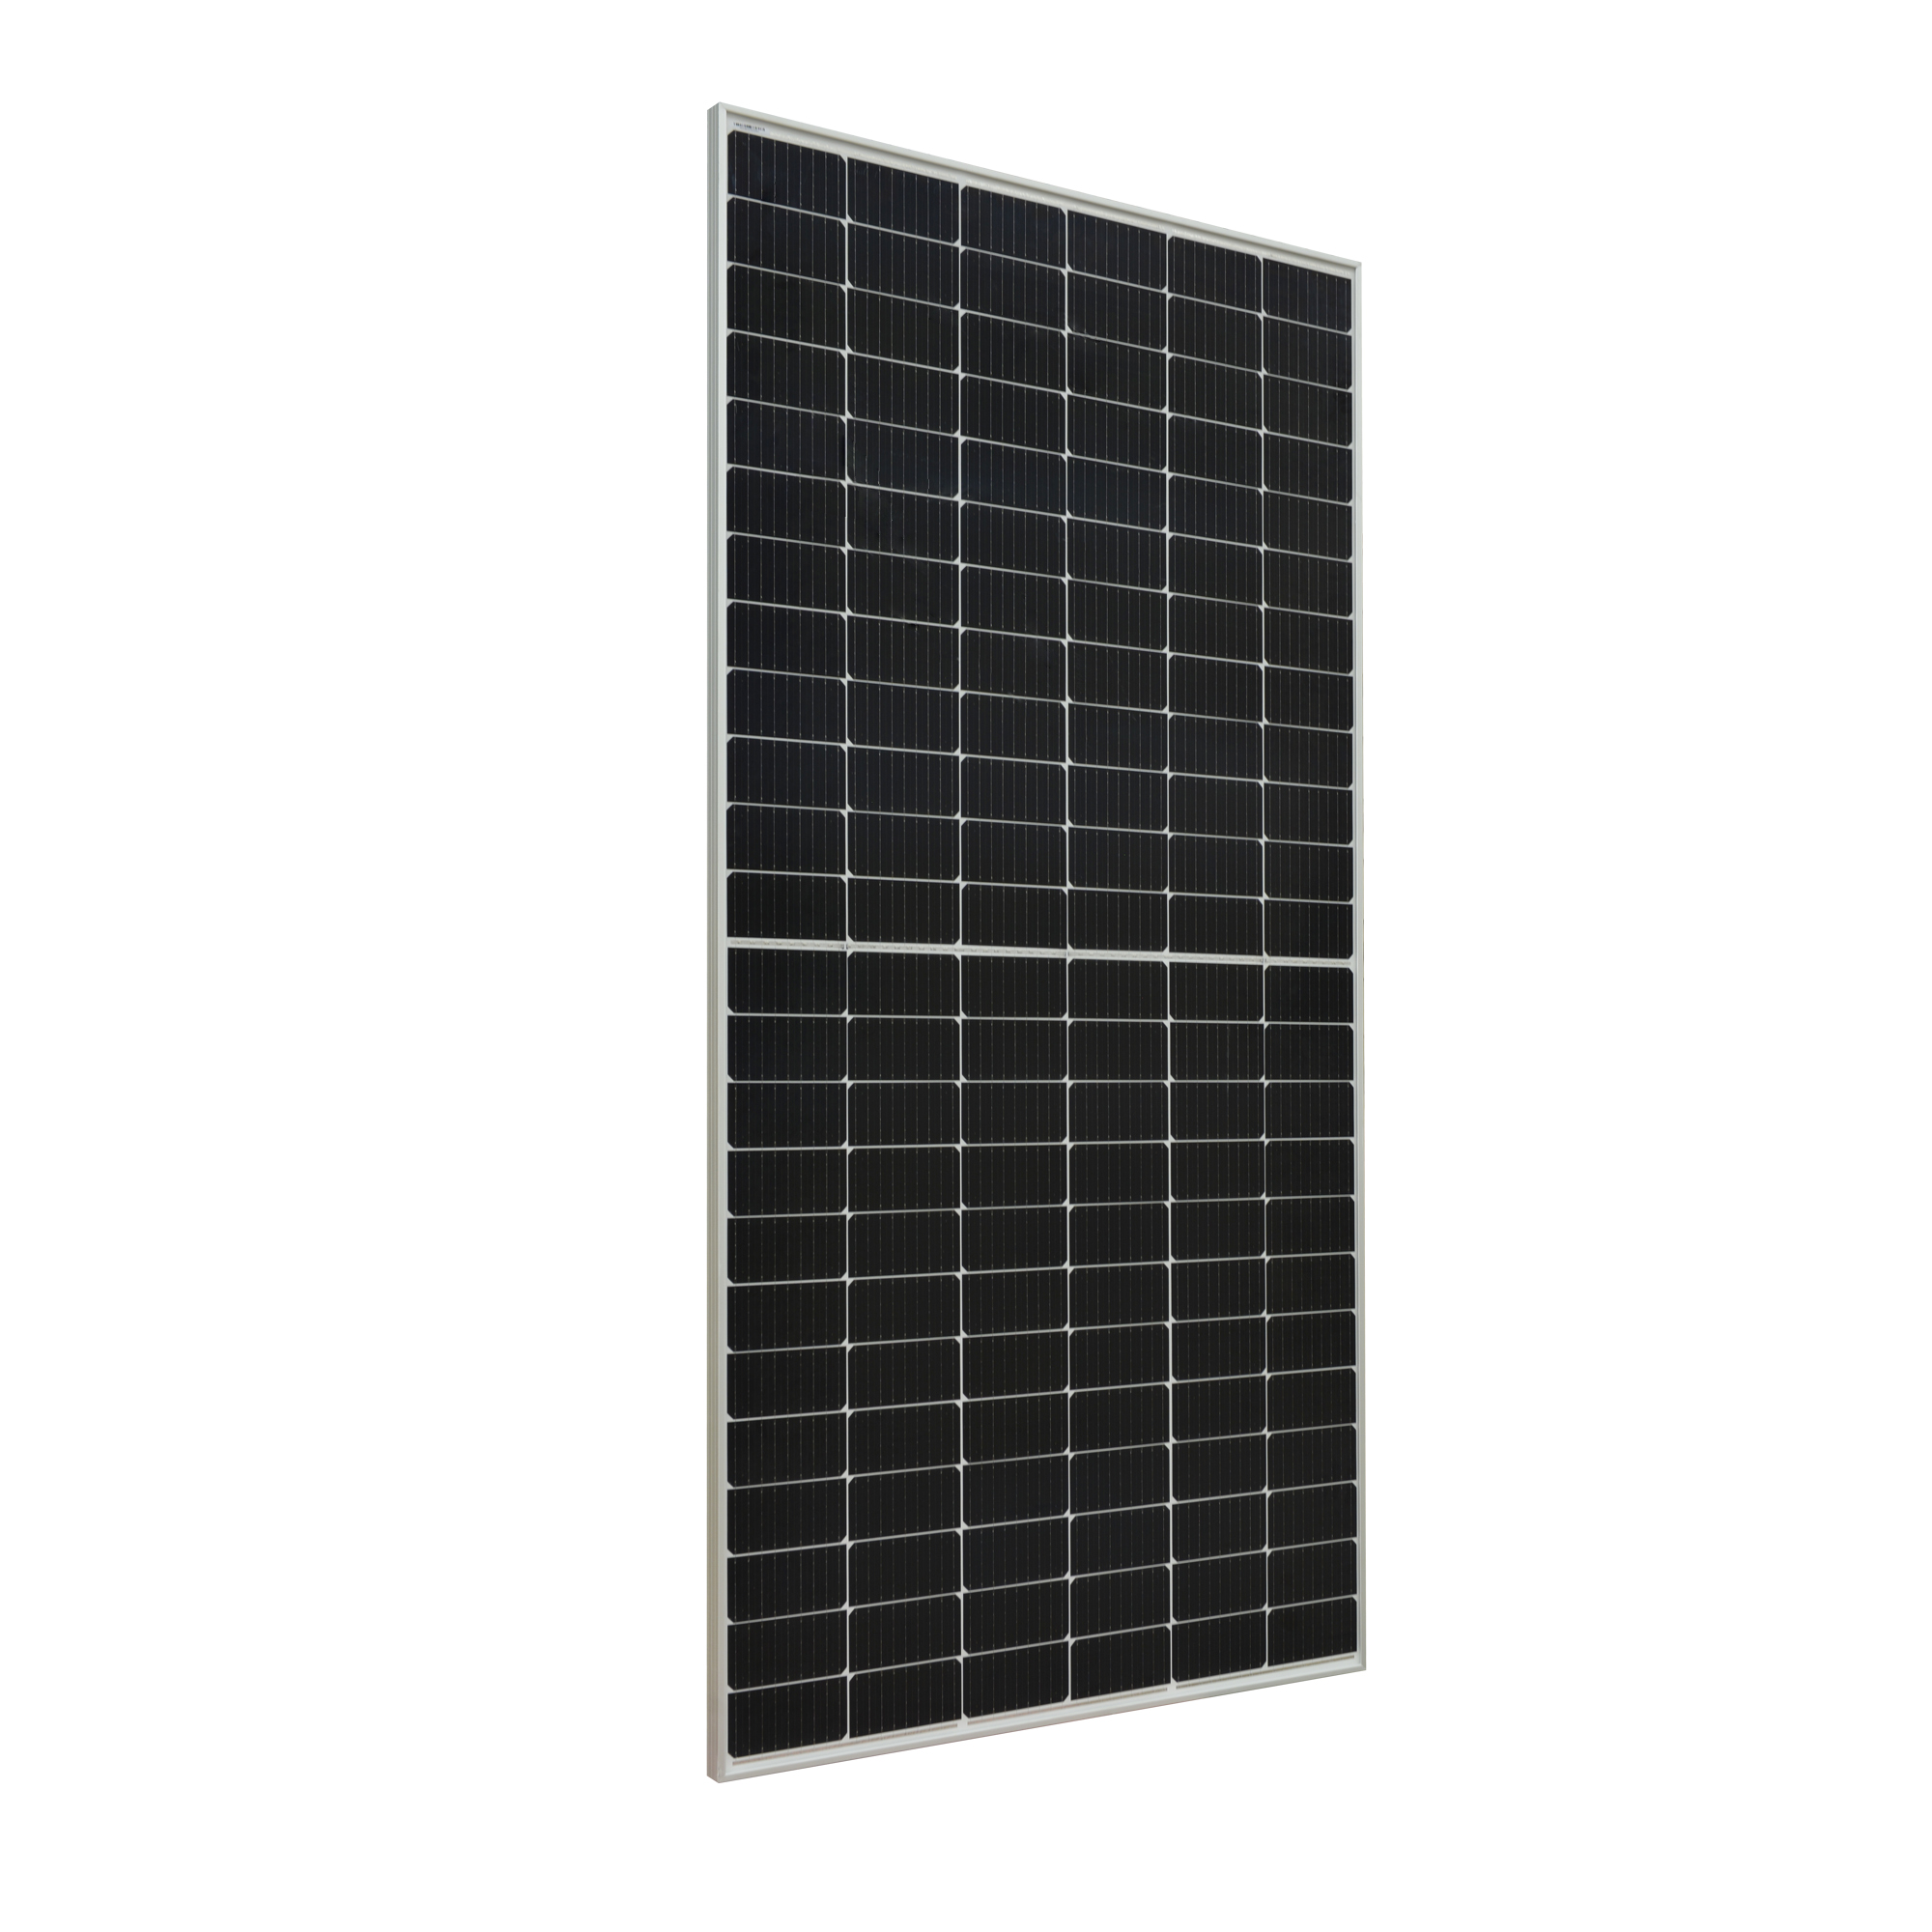 150W Monocrystalline Off-grid Solar System Panel For House Photovoltaic Solar Power Panel